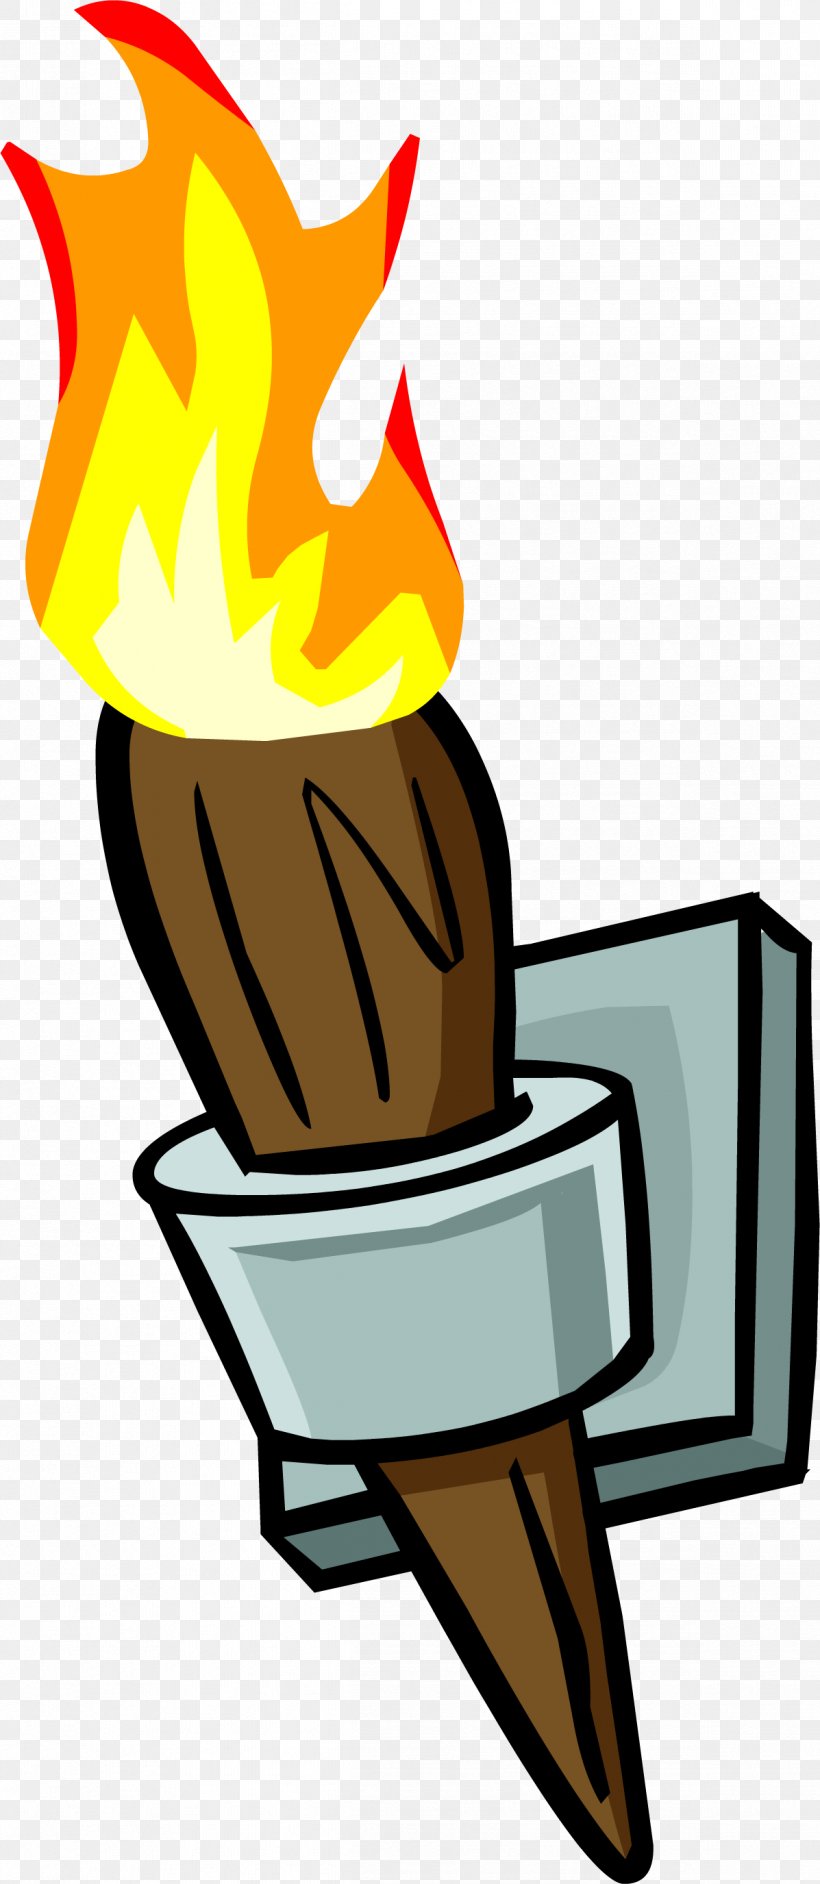 Clip Art Torch Wall Image, PNG, 1197x2751px, Torch, Art, Artwork, Flashlight, Sconce Download Free